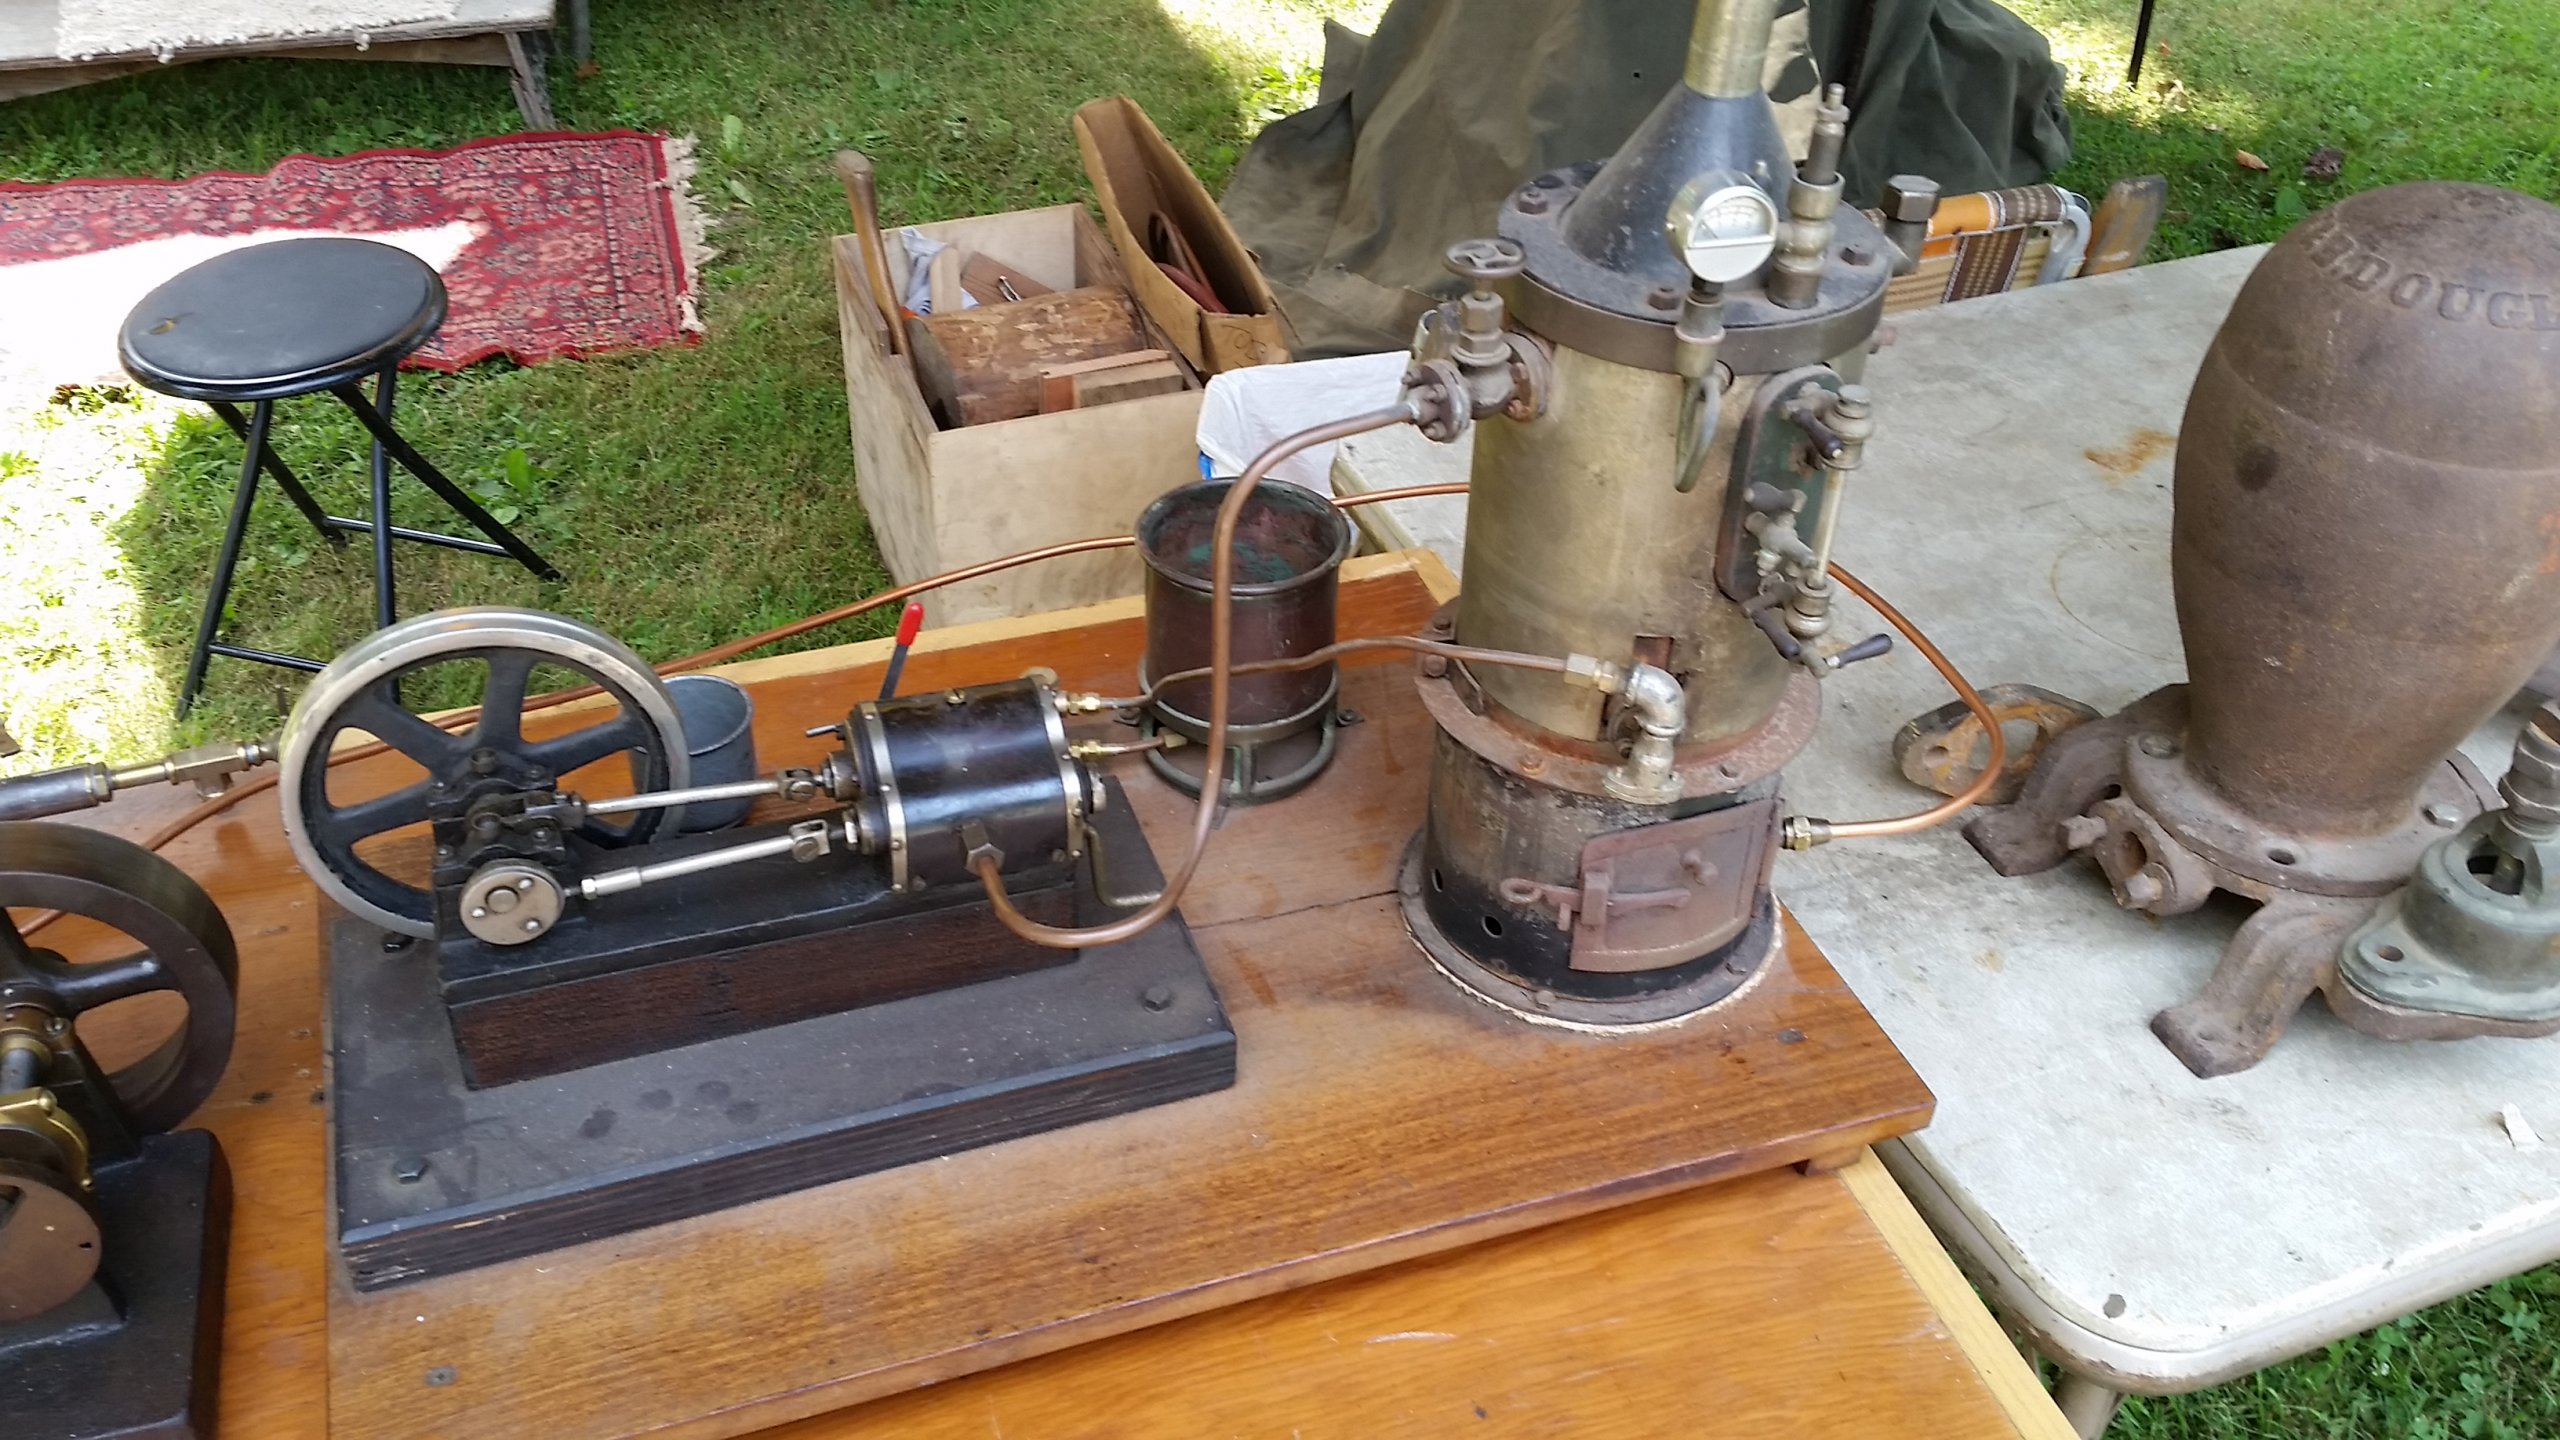 toy steam engine and boiler